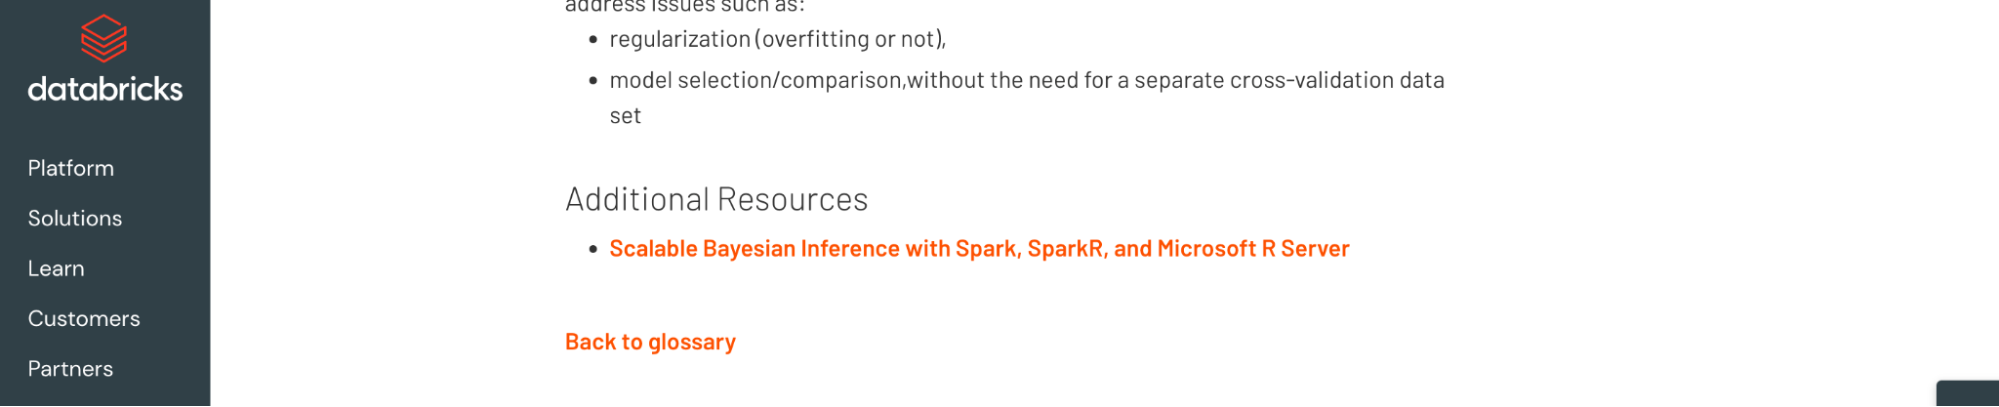 Databricks additional resources section of glossary items